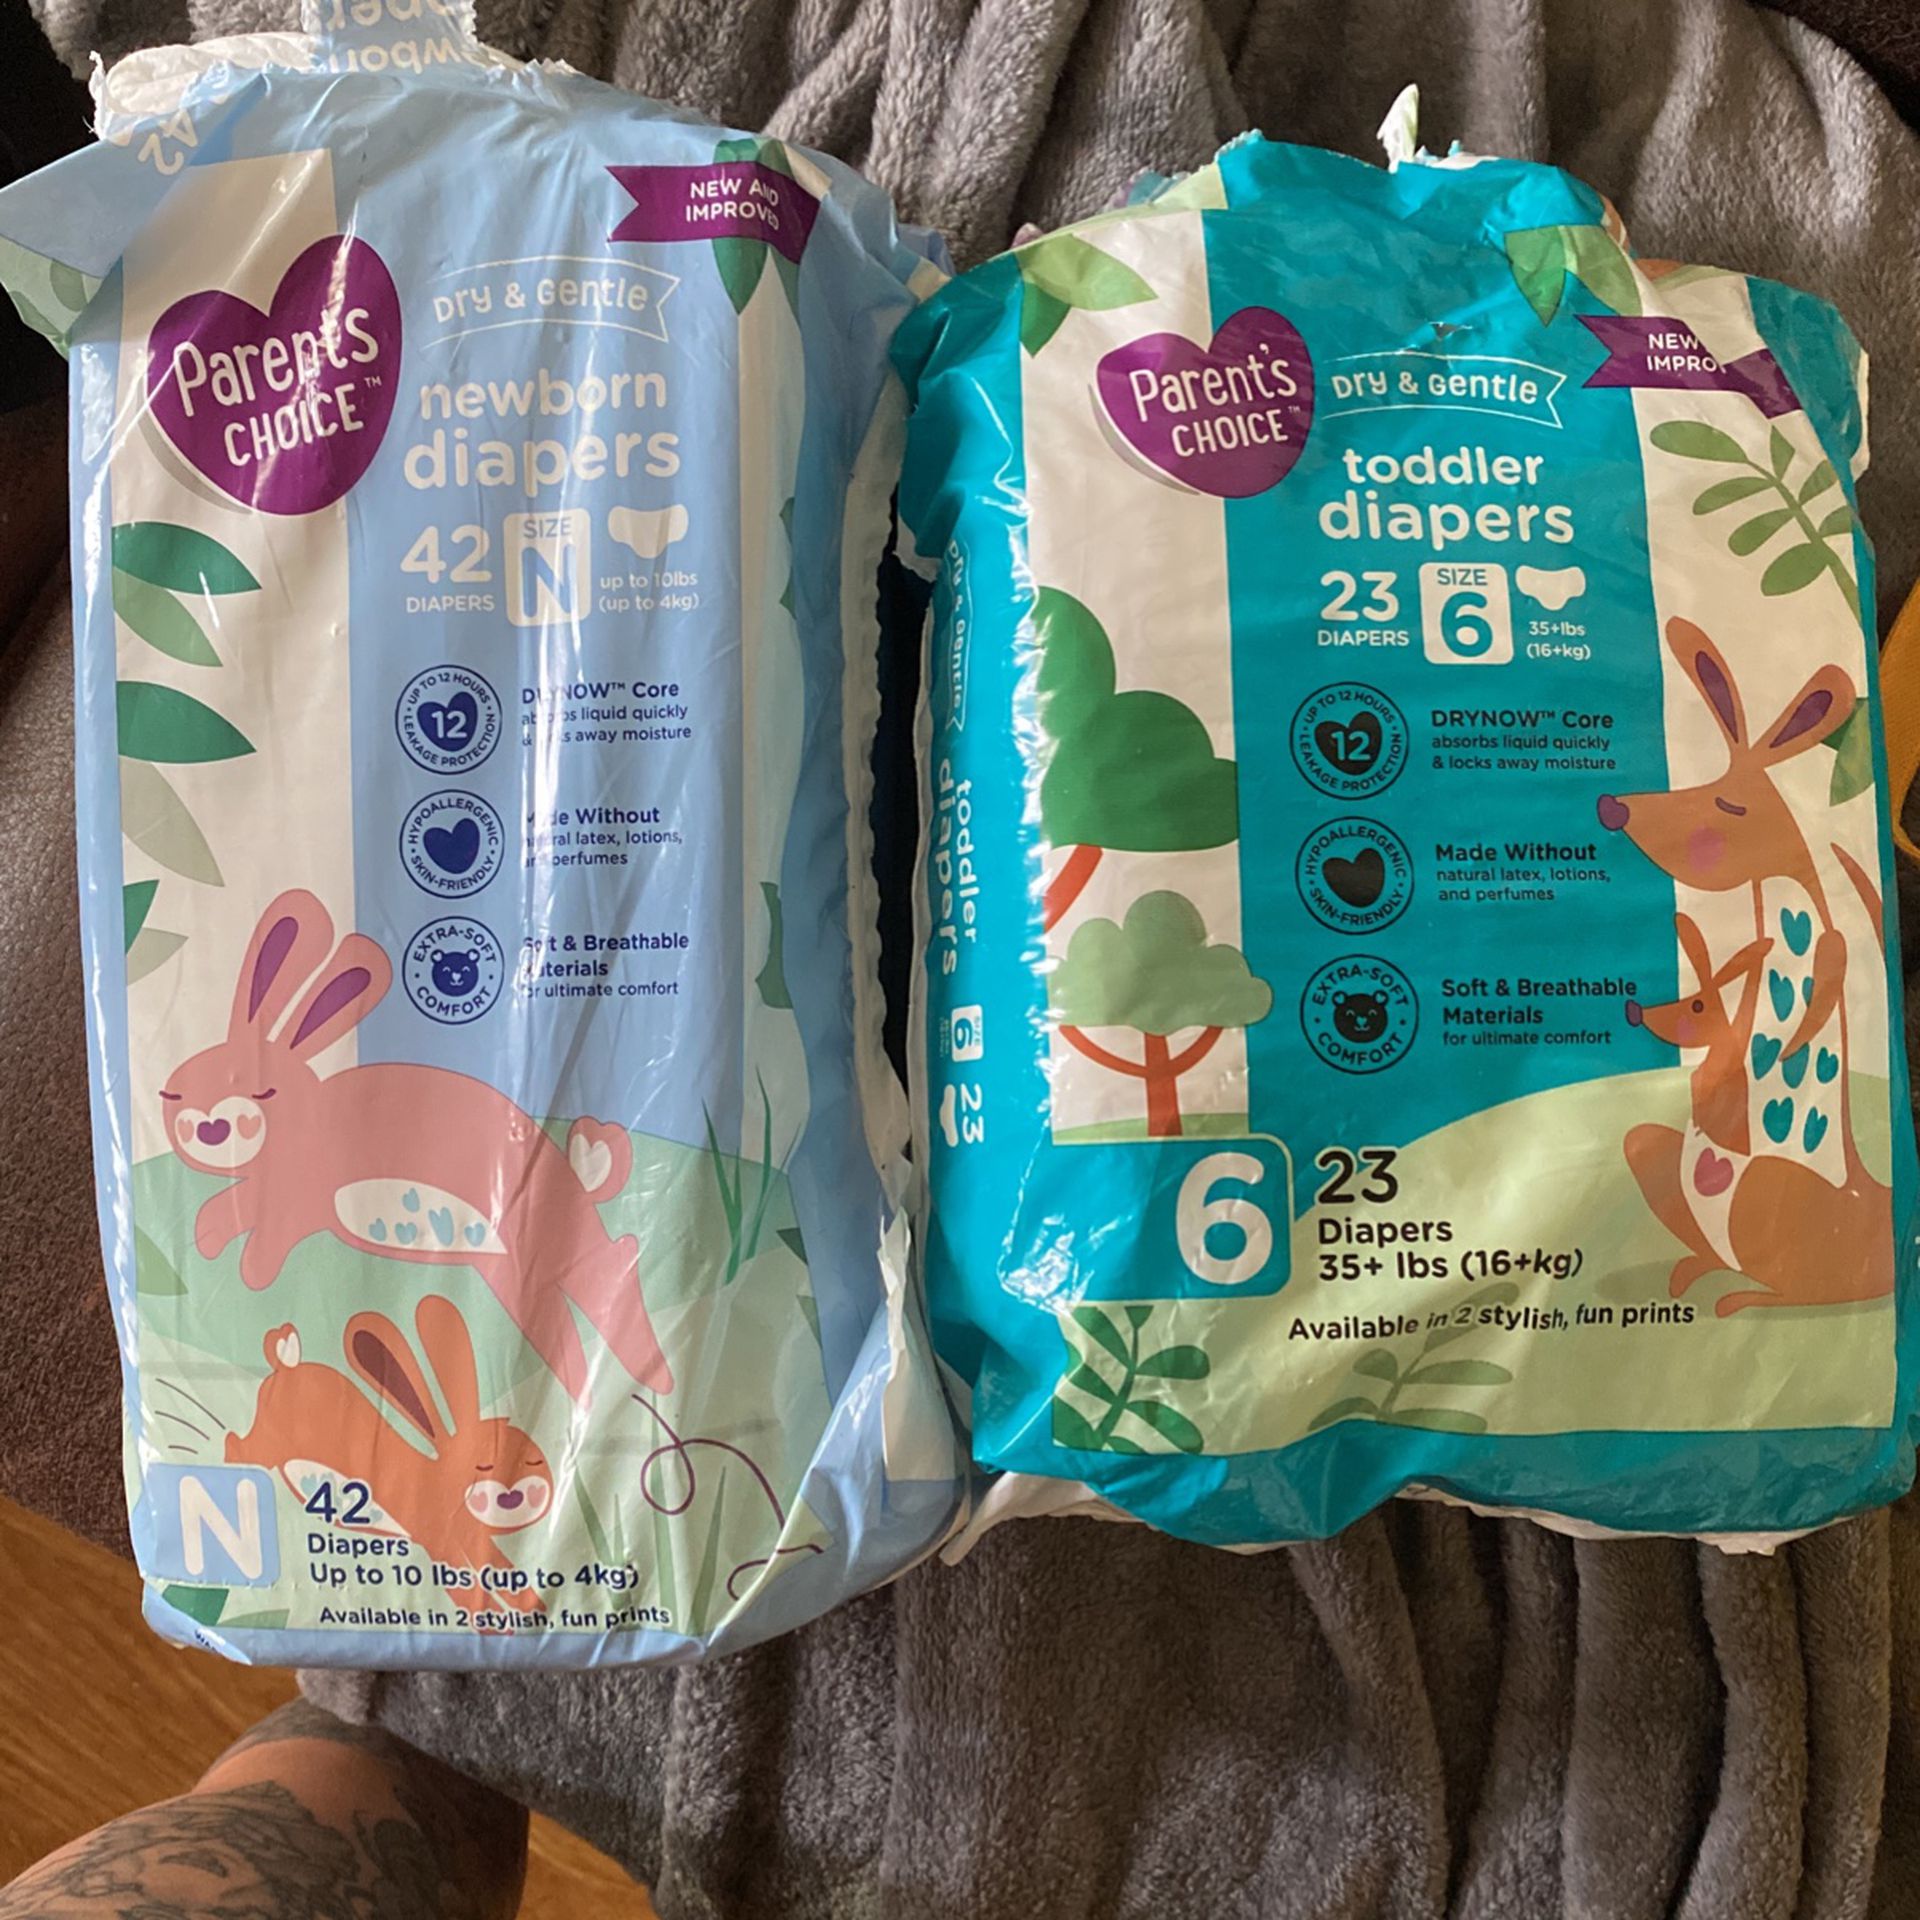 FREE PARENTS CHOICE DIAPERS, Size N And 6. Good For Diaper cakes 